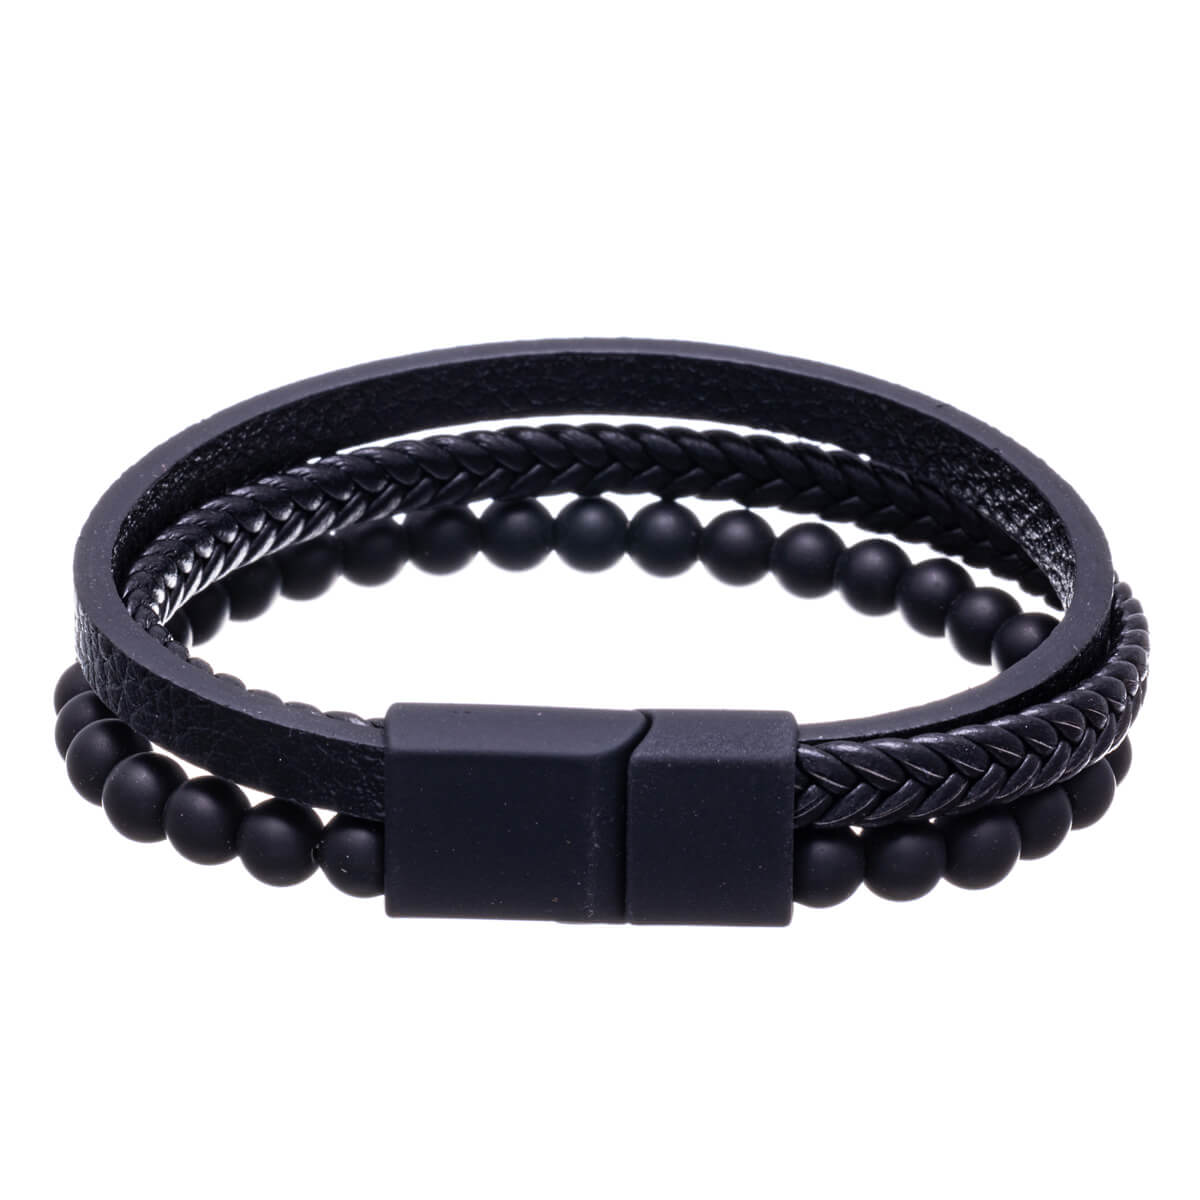 Three row leather bracelet with glass beads (Steel 316L)